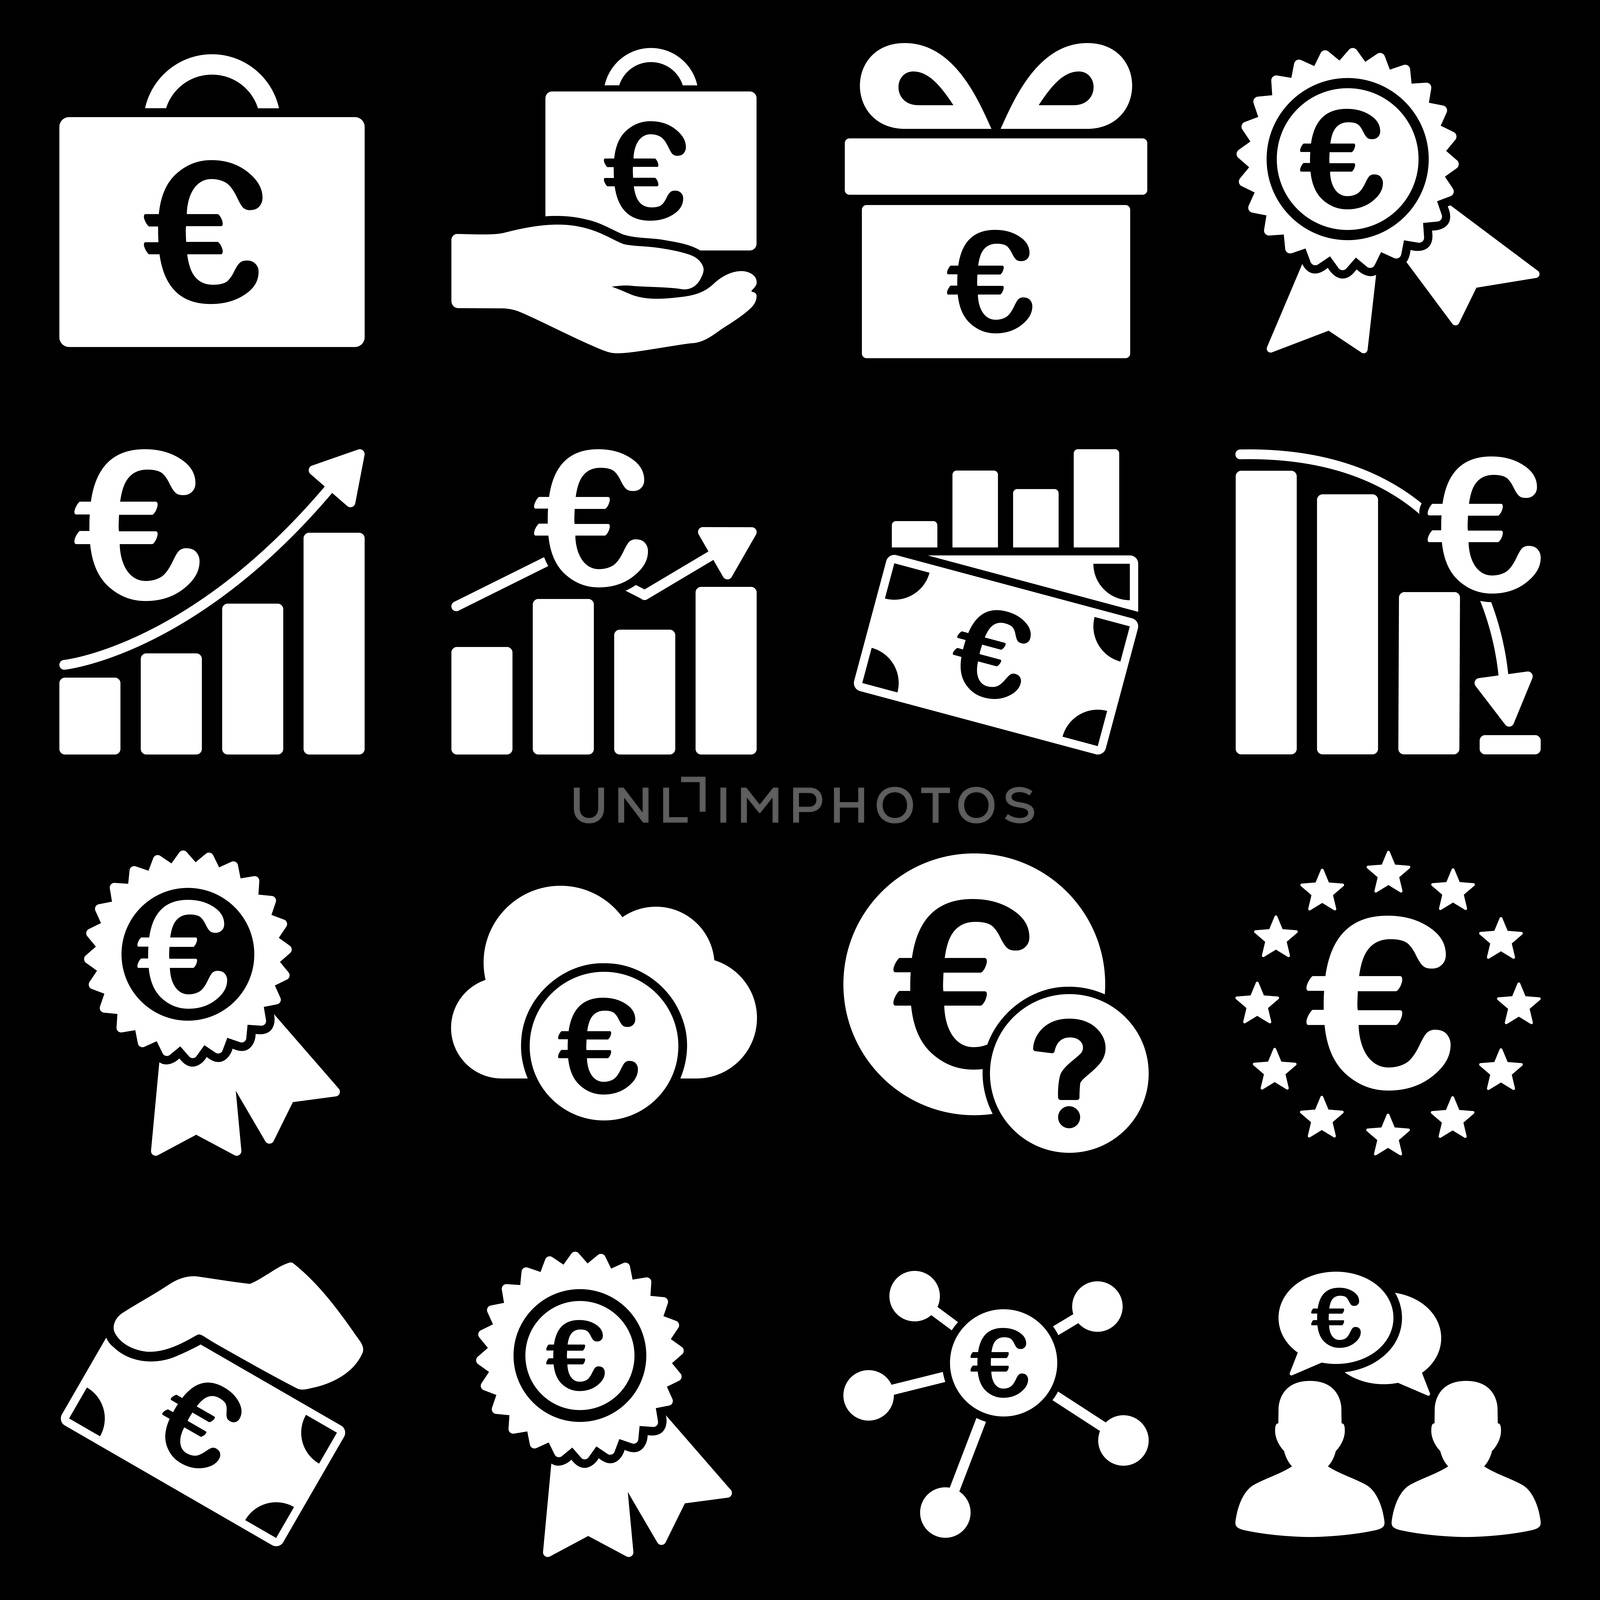 Euro banking business and service tools icons. These flat icons use white color. Images are isolated on a black background. Angles are rounded.